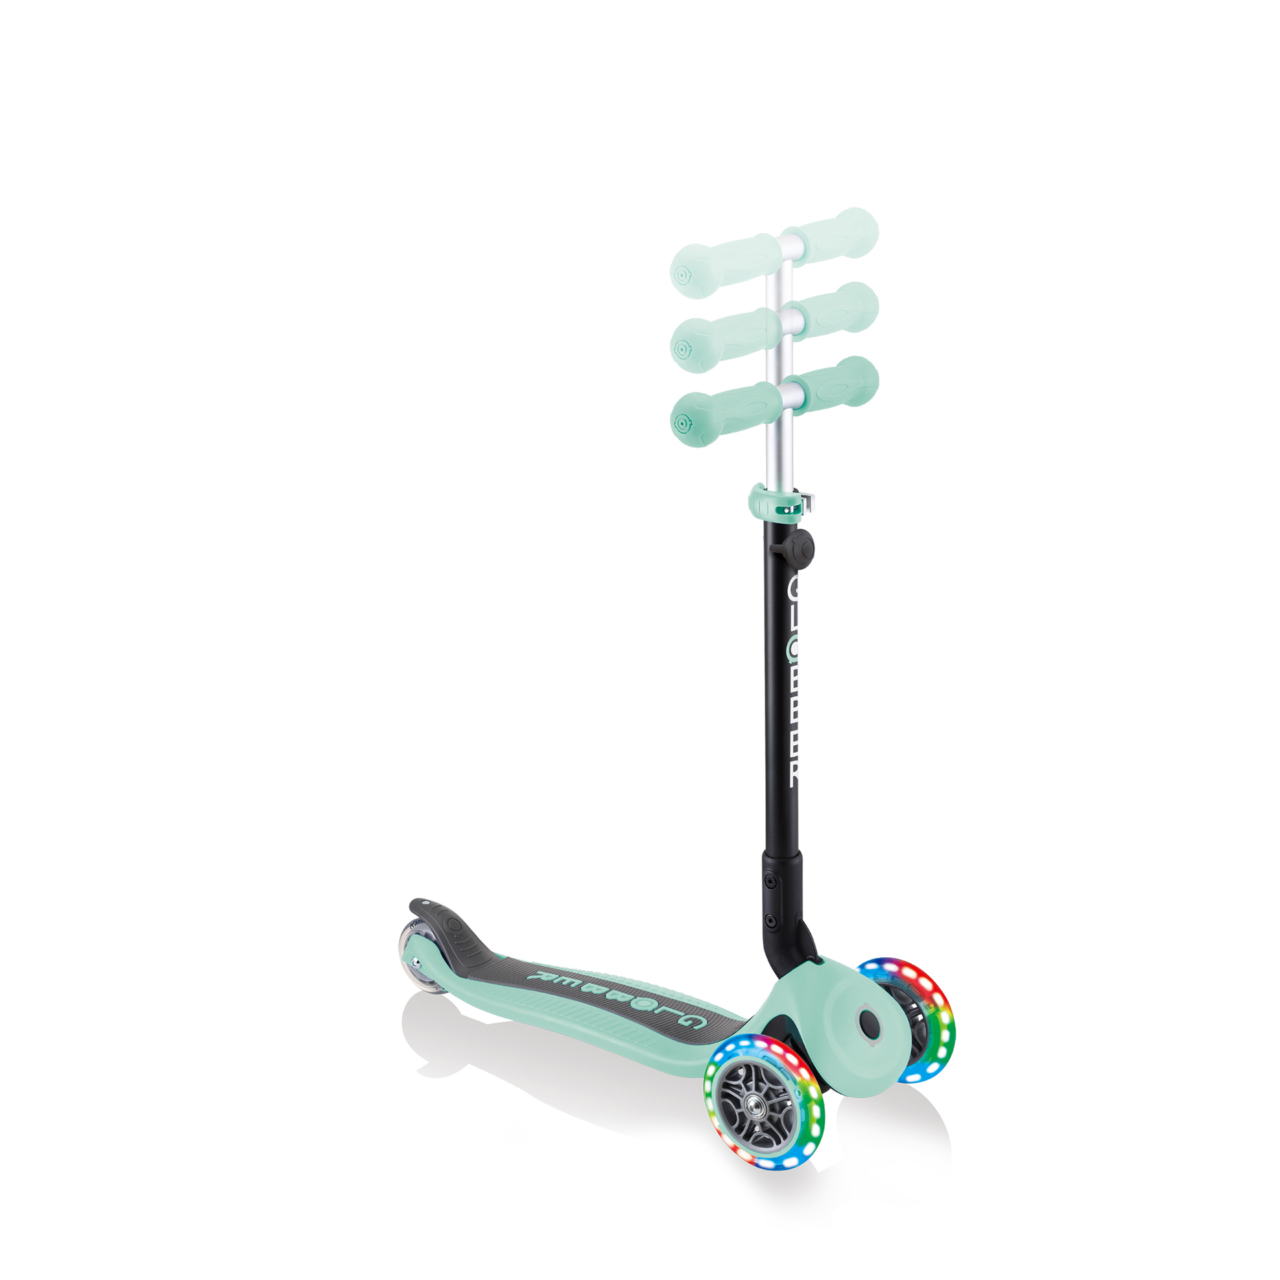 Mint Scooter With Adjustable T Bar.jpg